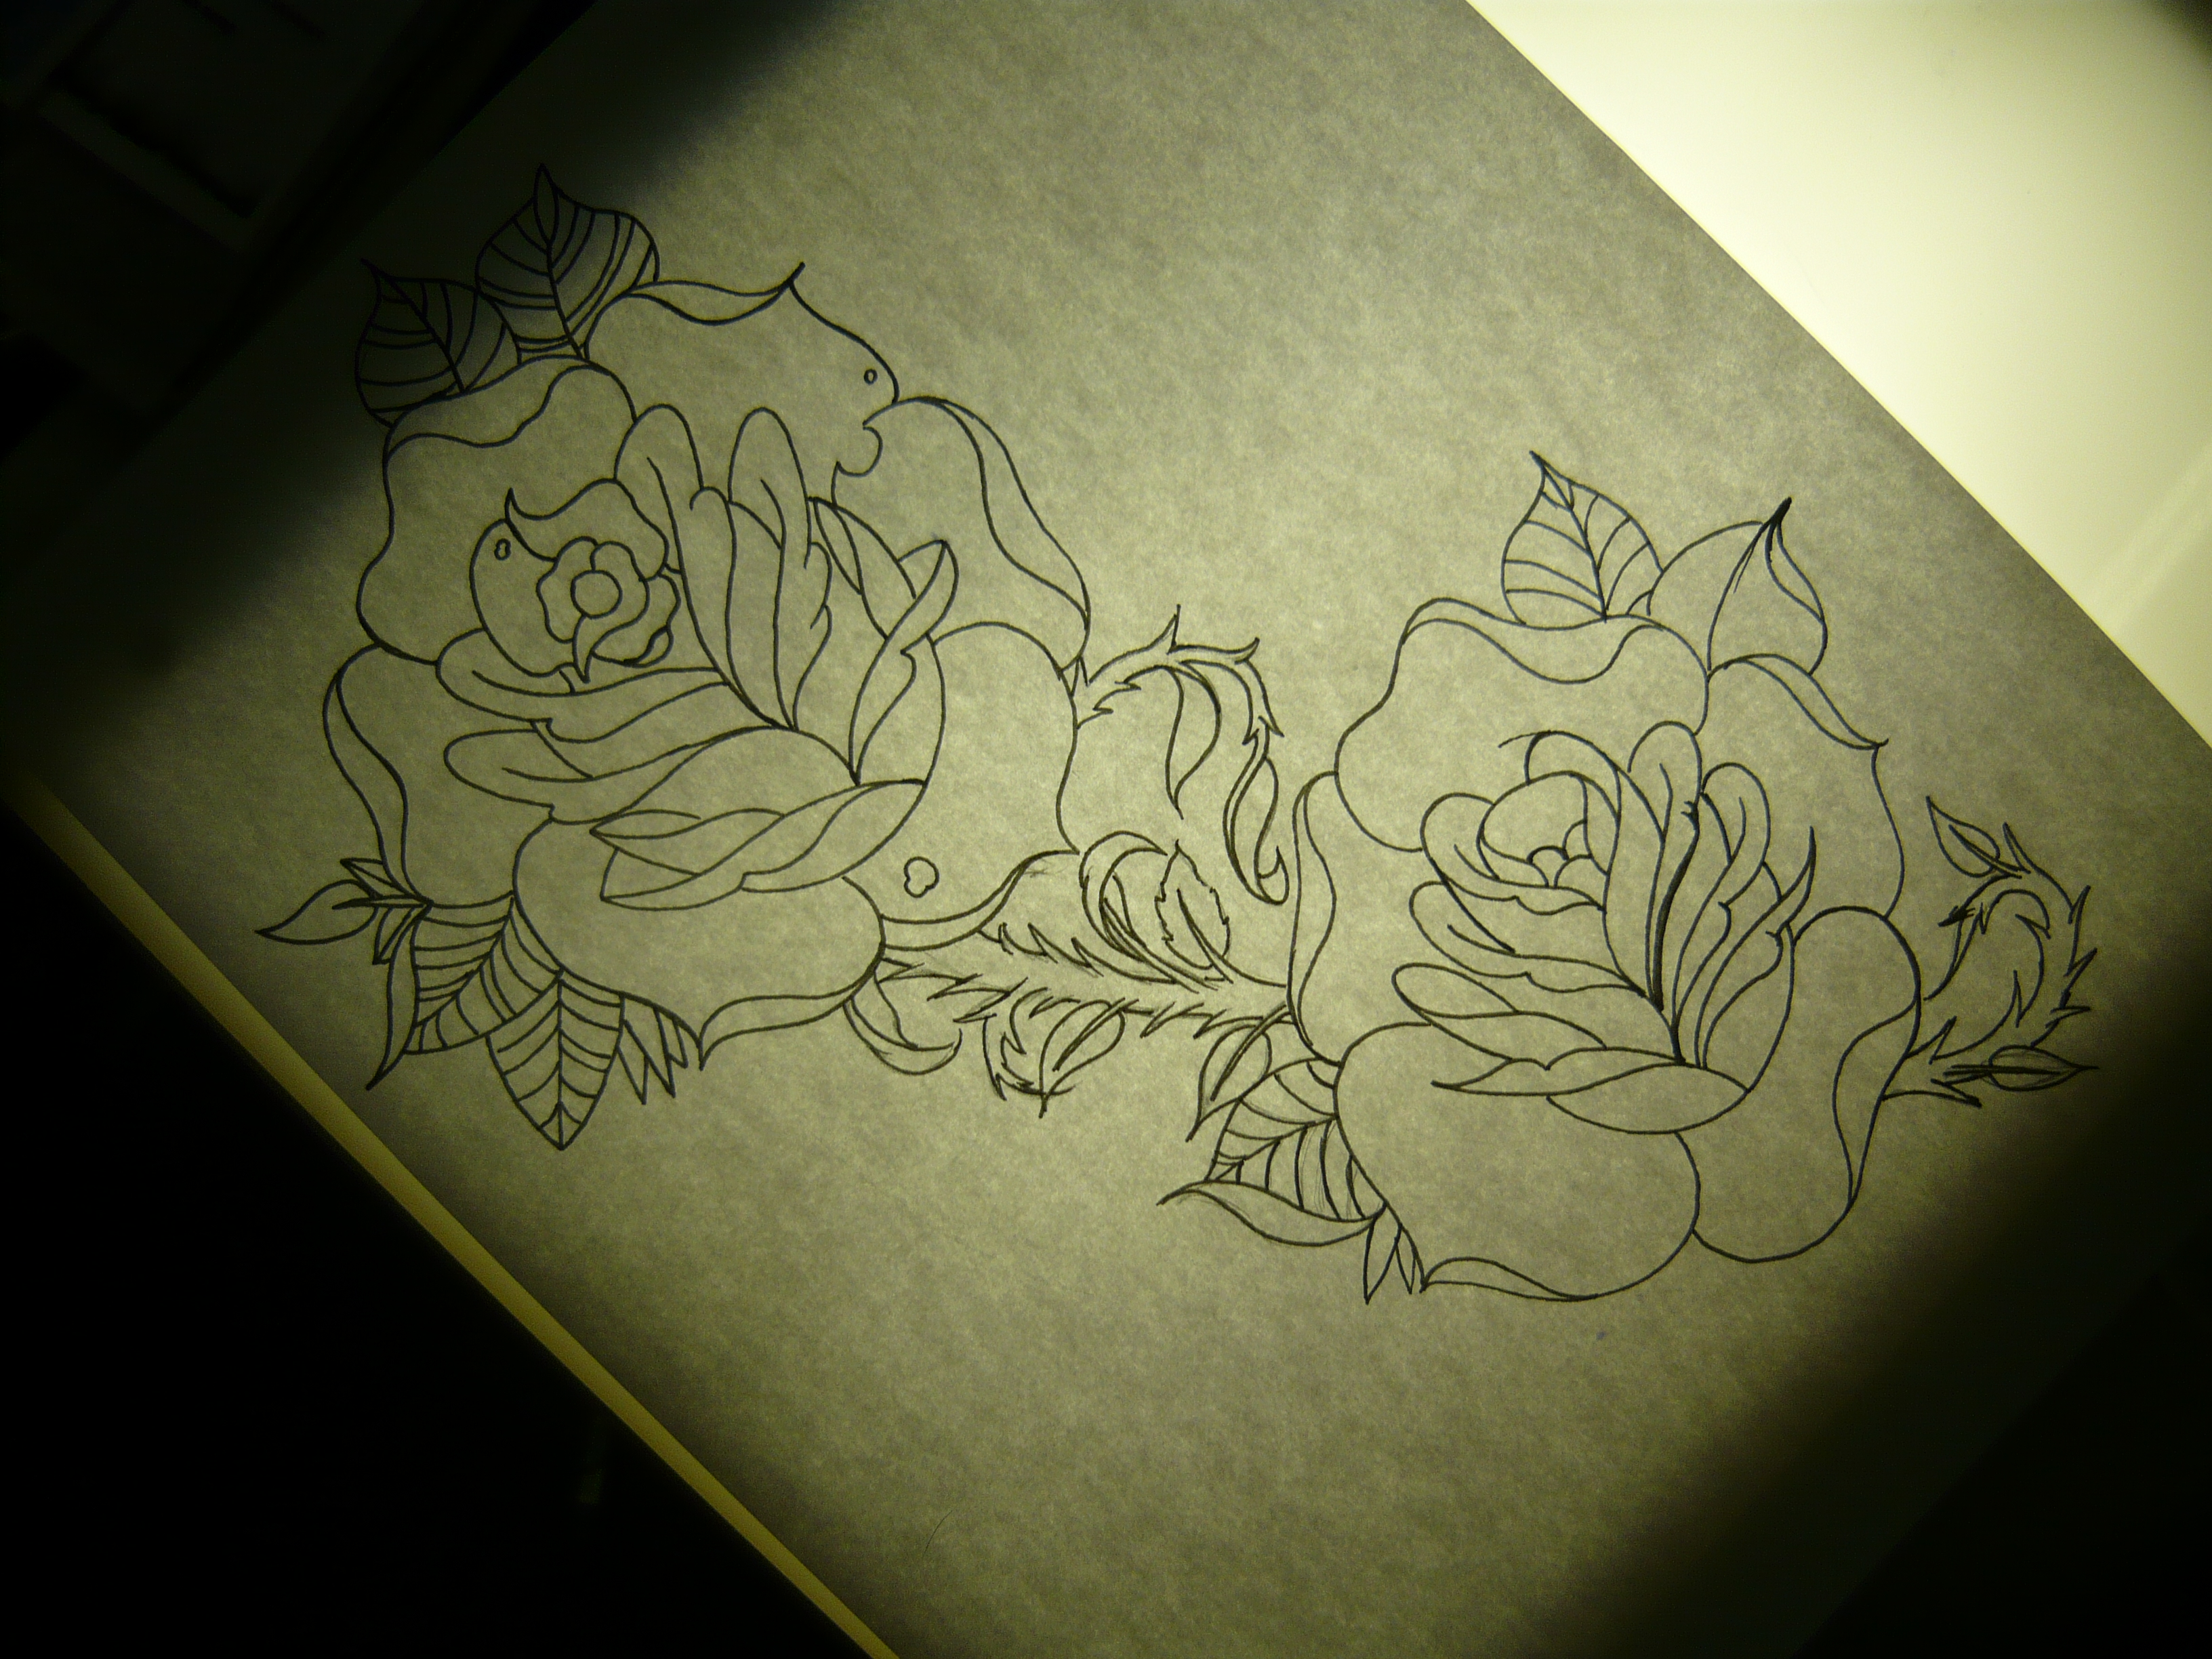 up tattooing the sketch I